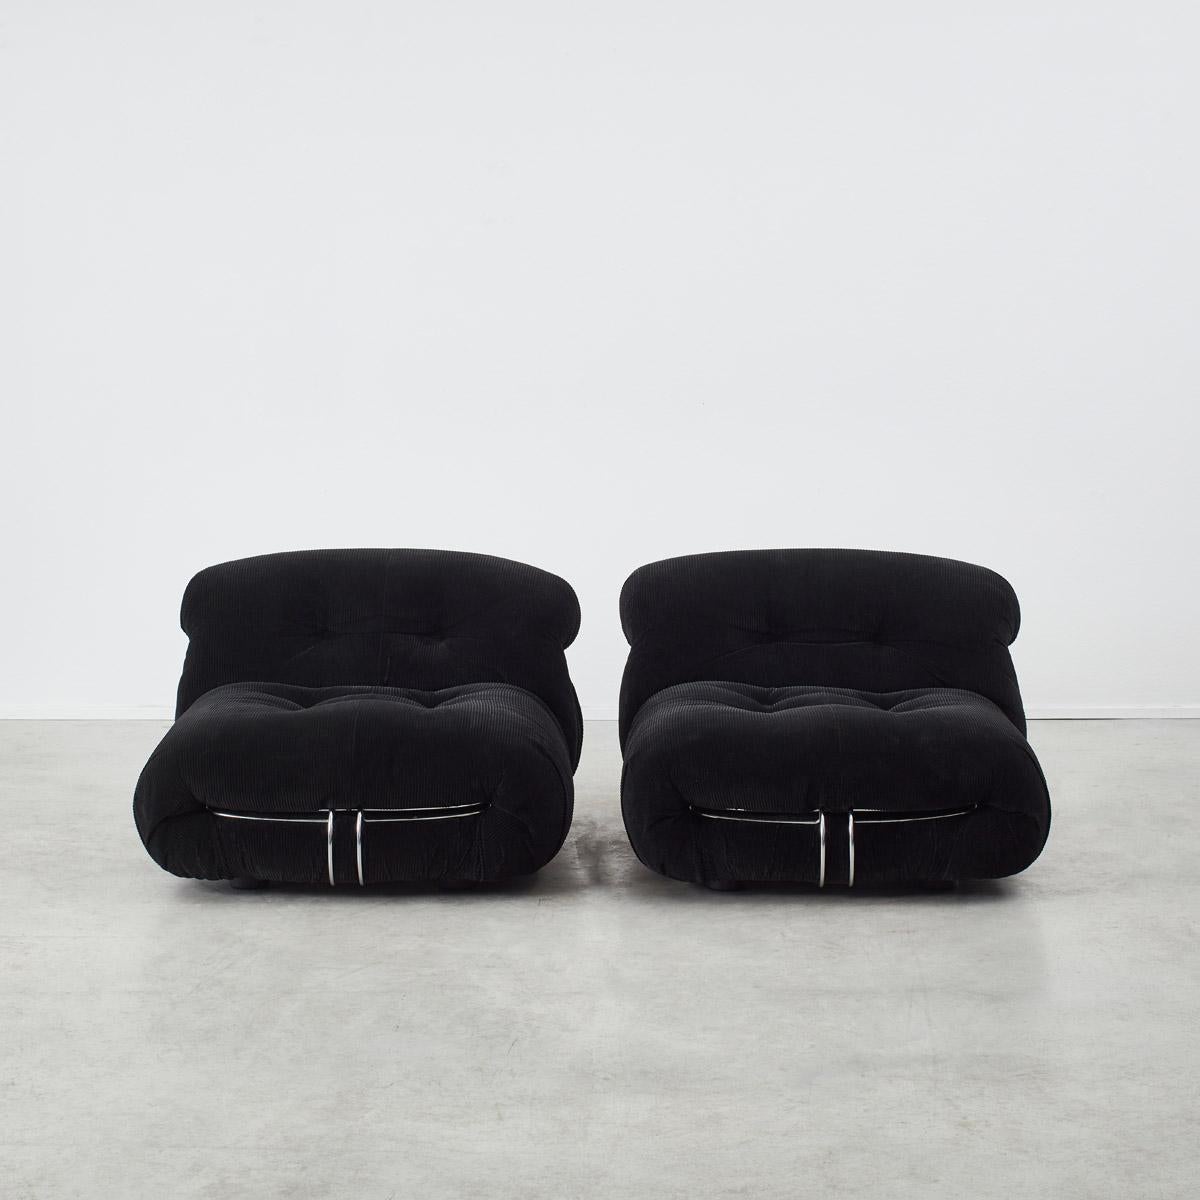 Modern Pair Afra and Tobia Scarpa Soriana Lounge Chairs for Cassina, Italy 1970s For Sale